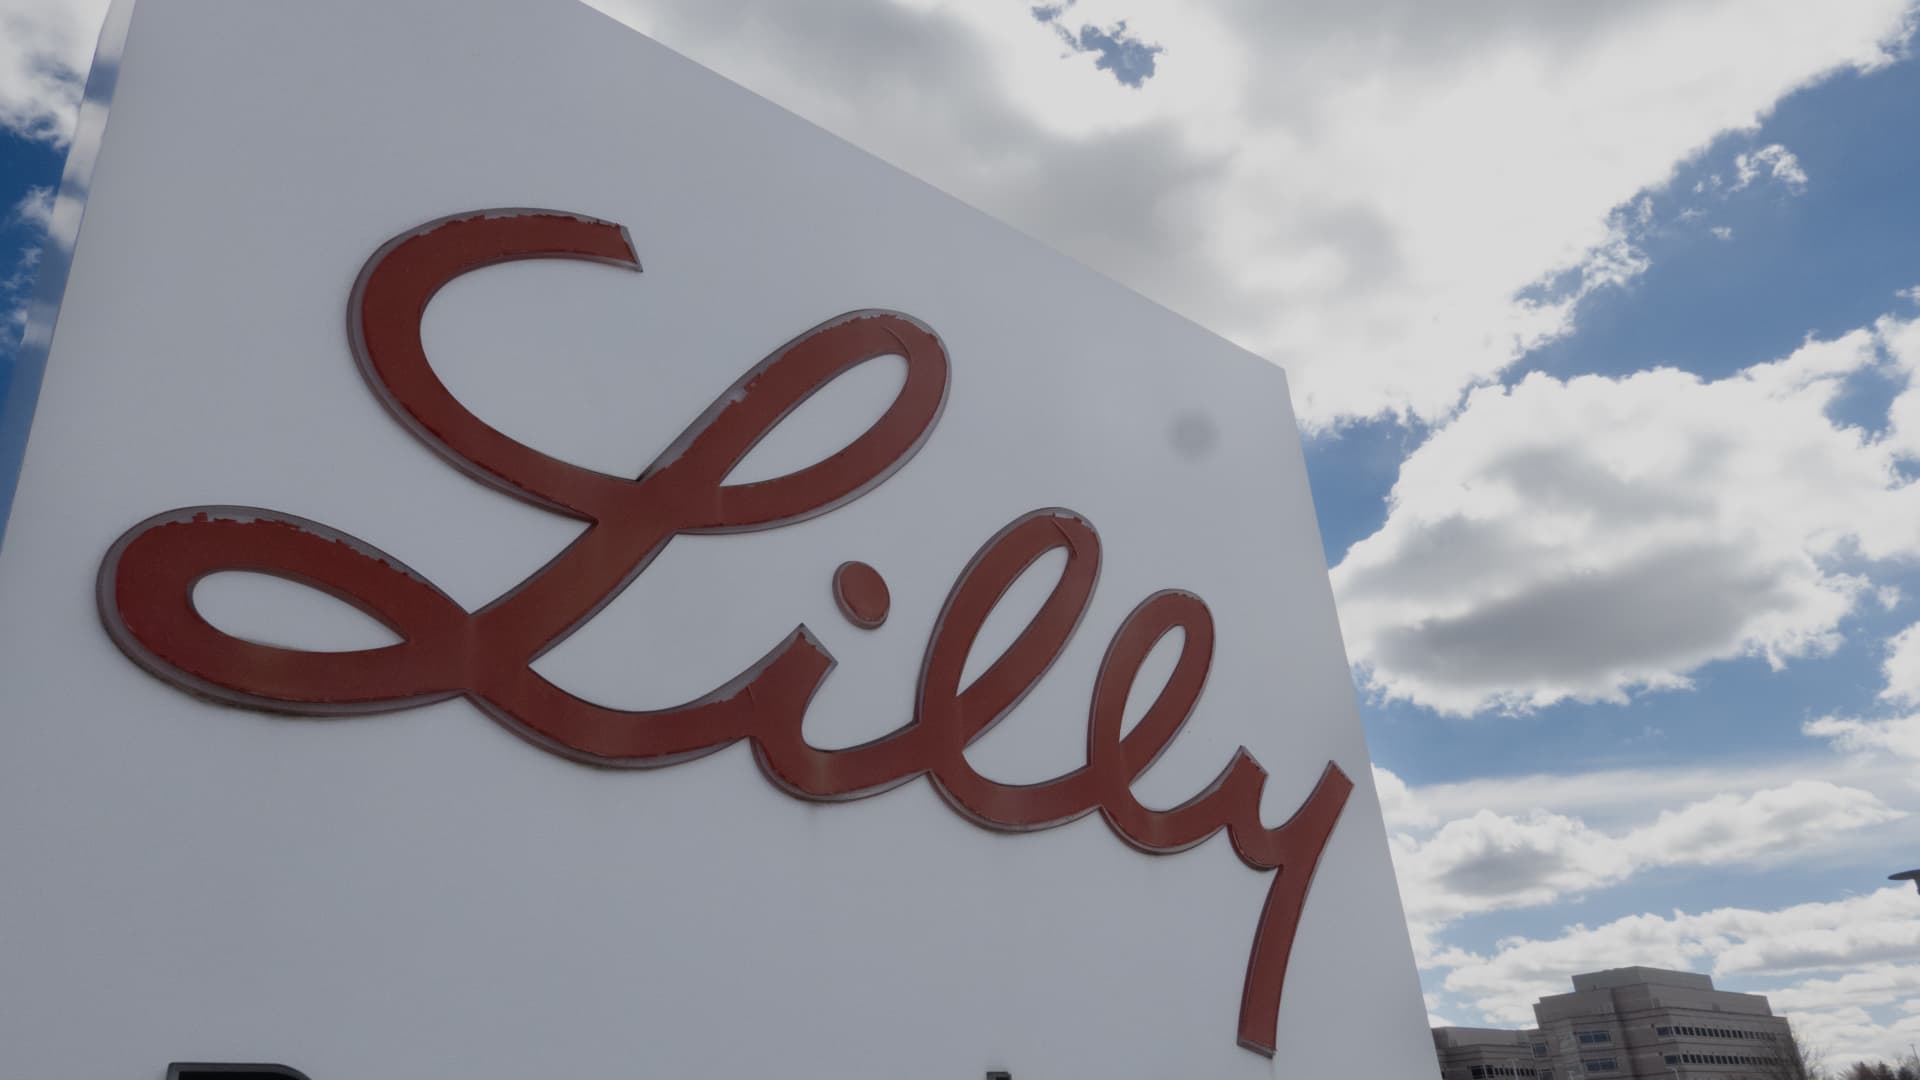 Eli Lilly stock hits new highs after a regulatory win in China. This is a big deal